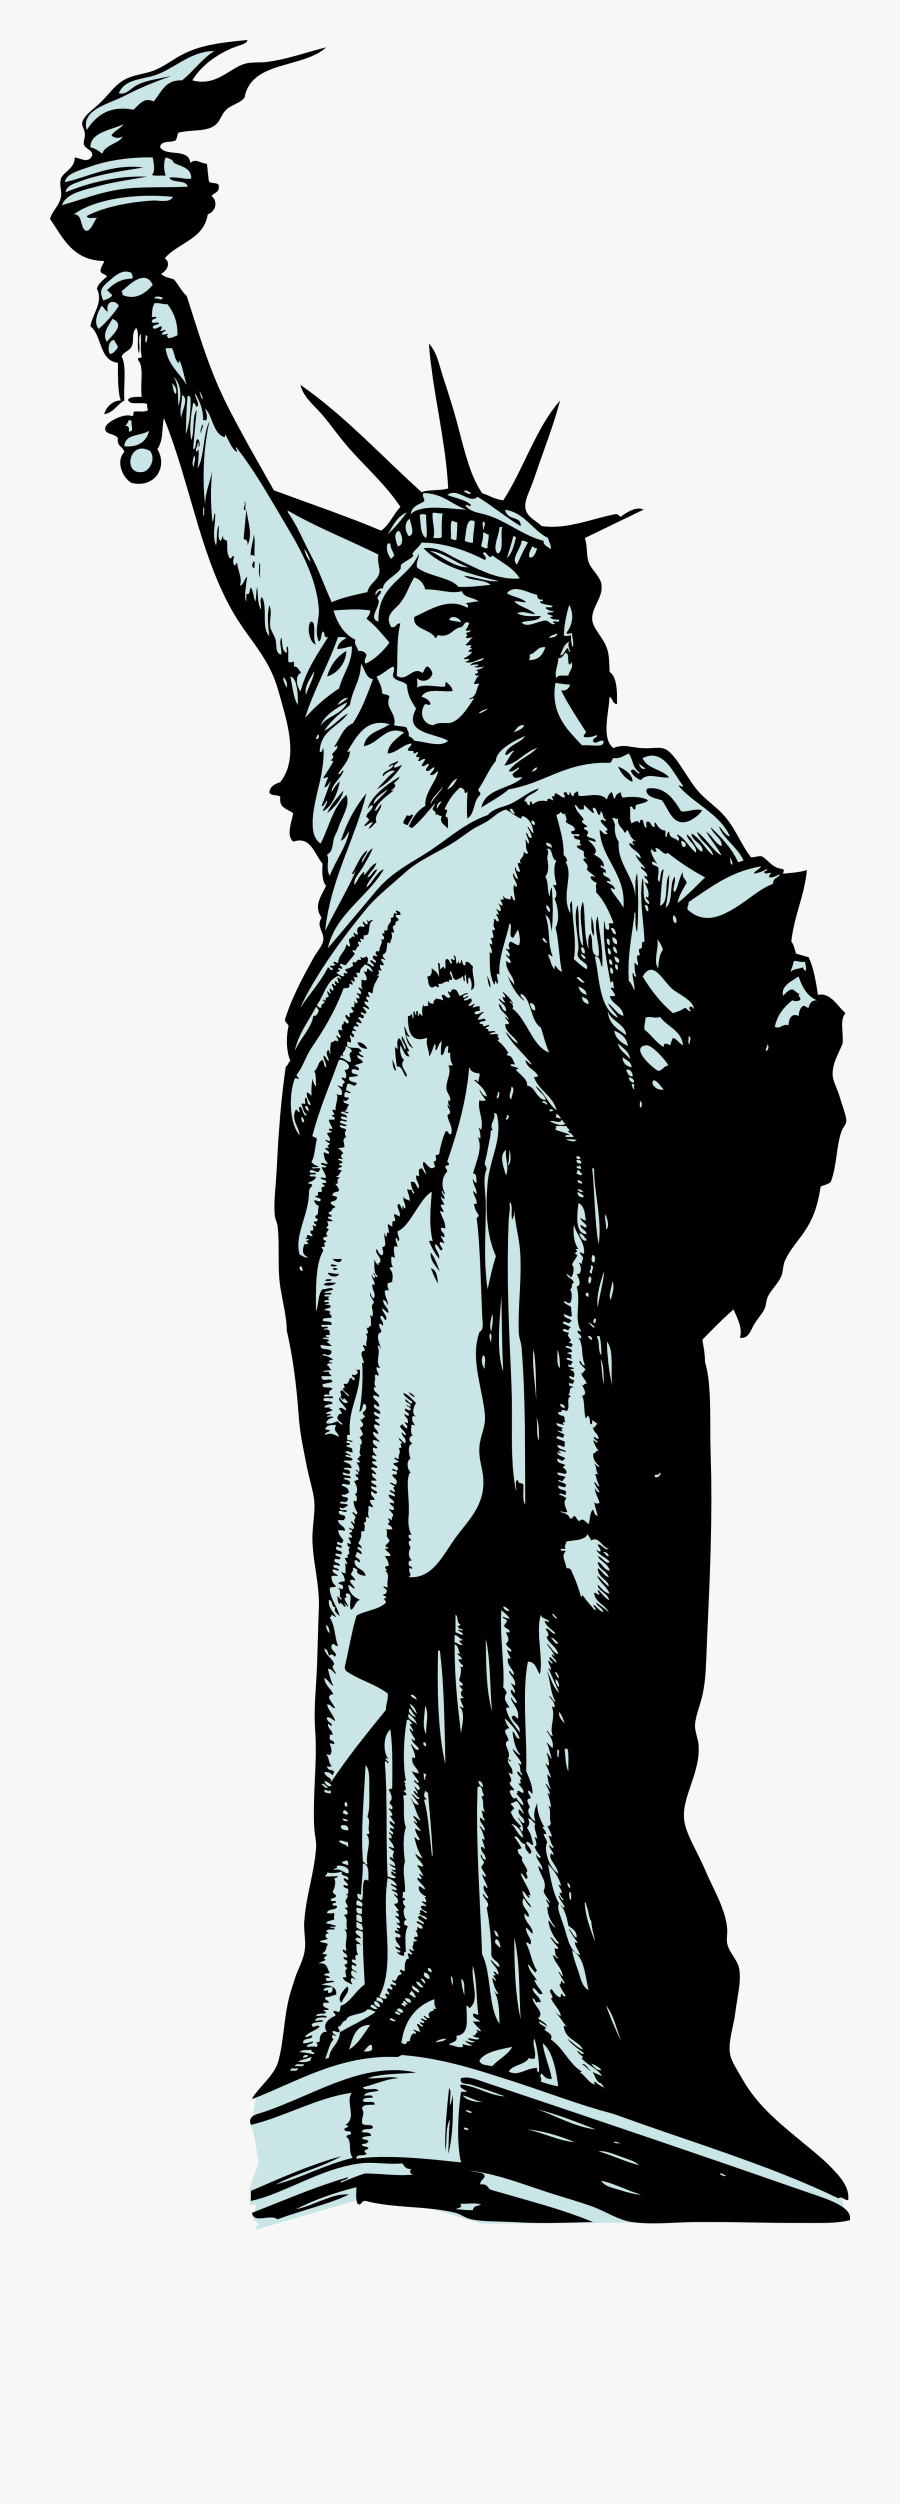 Statue Of Liberty Clipart No Background, Transparent Clipart